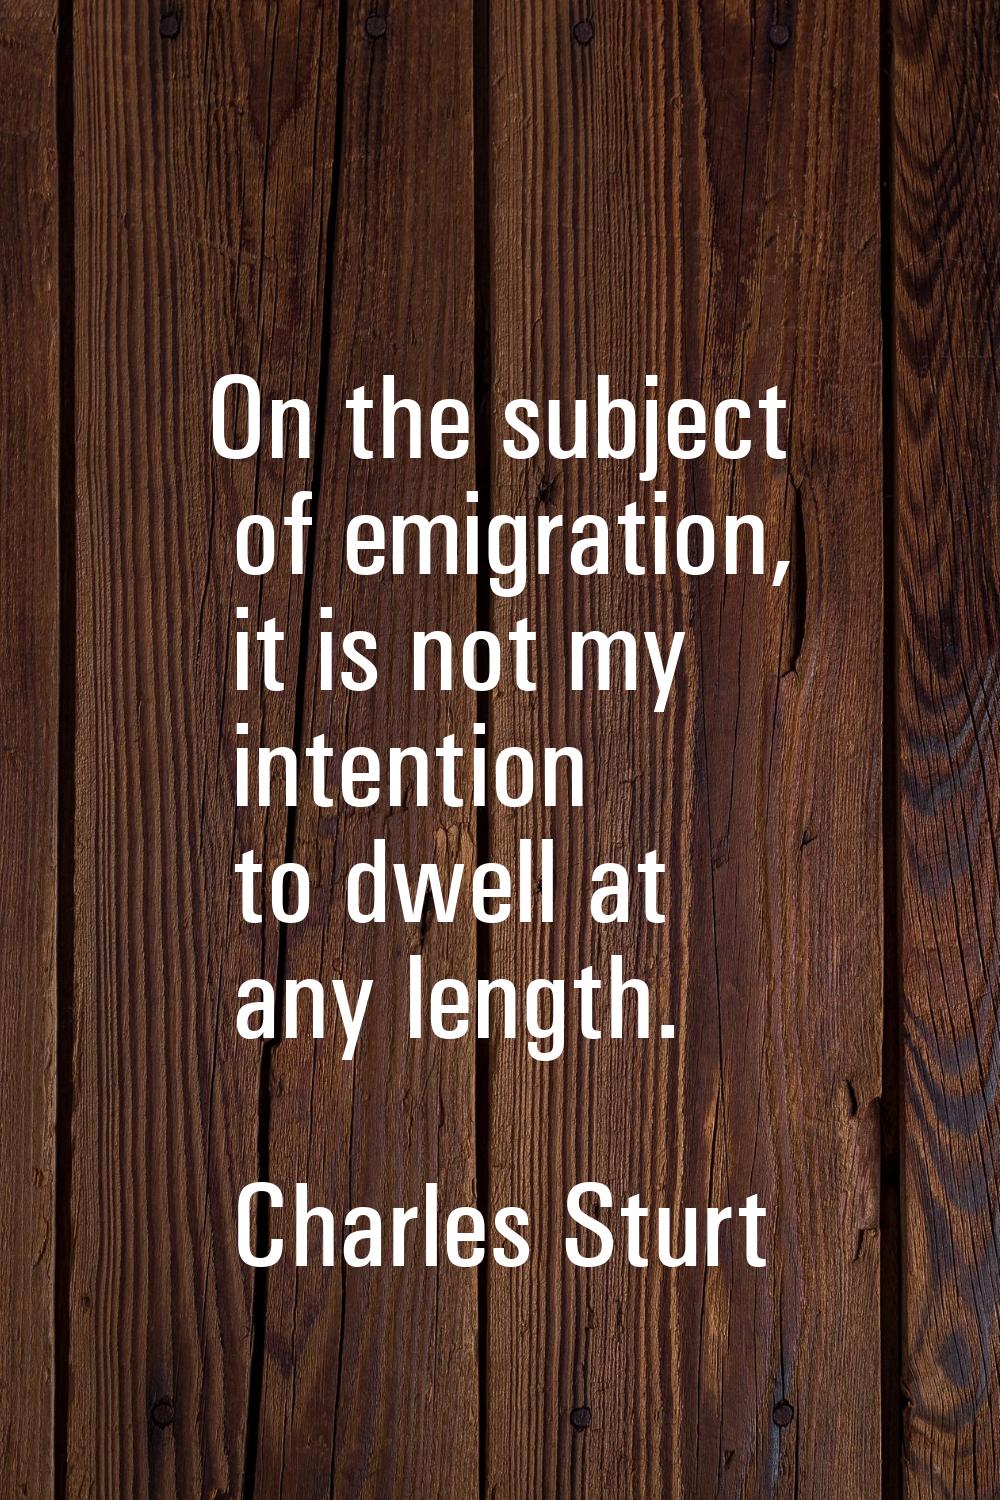 On the subject of emigration, it is not my intention to dwell at any length.